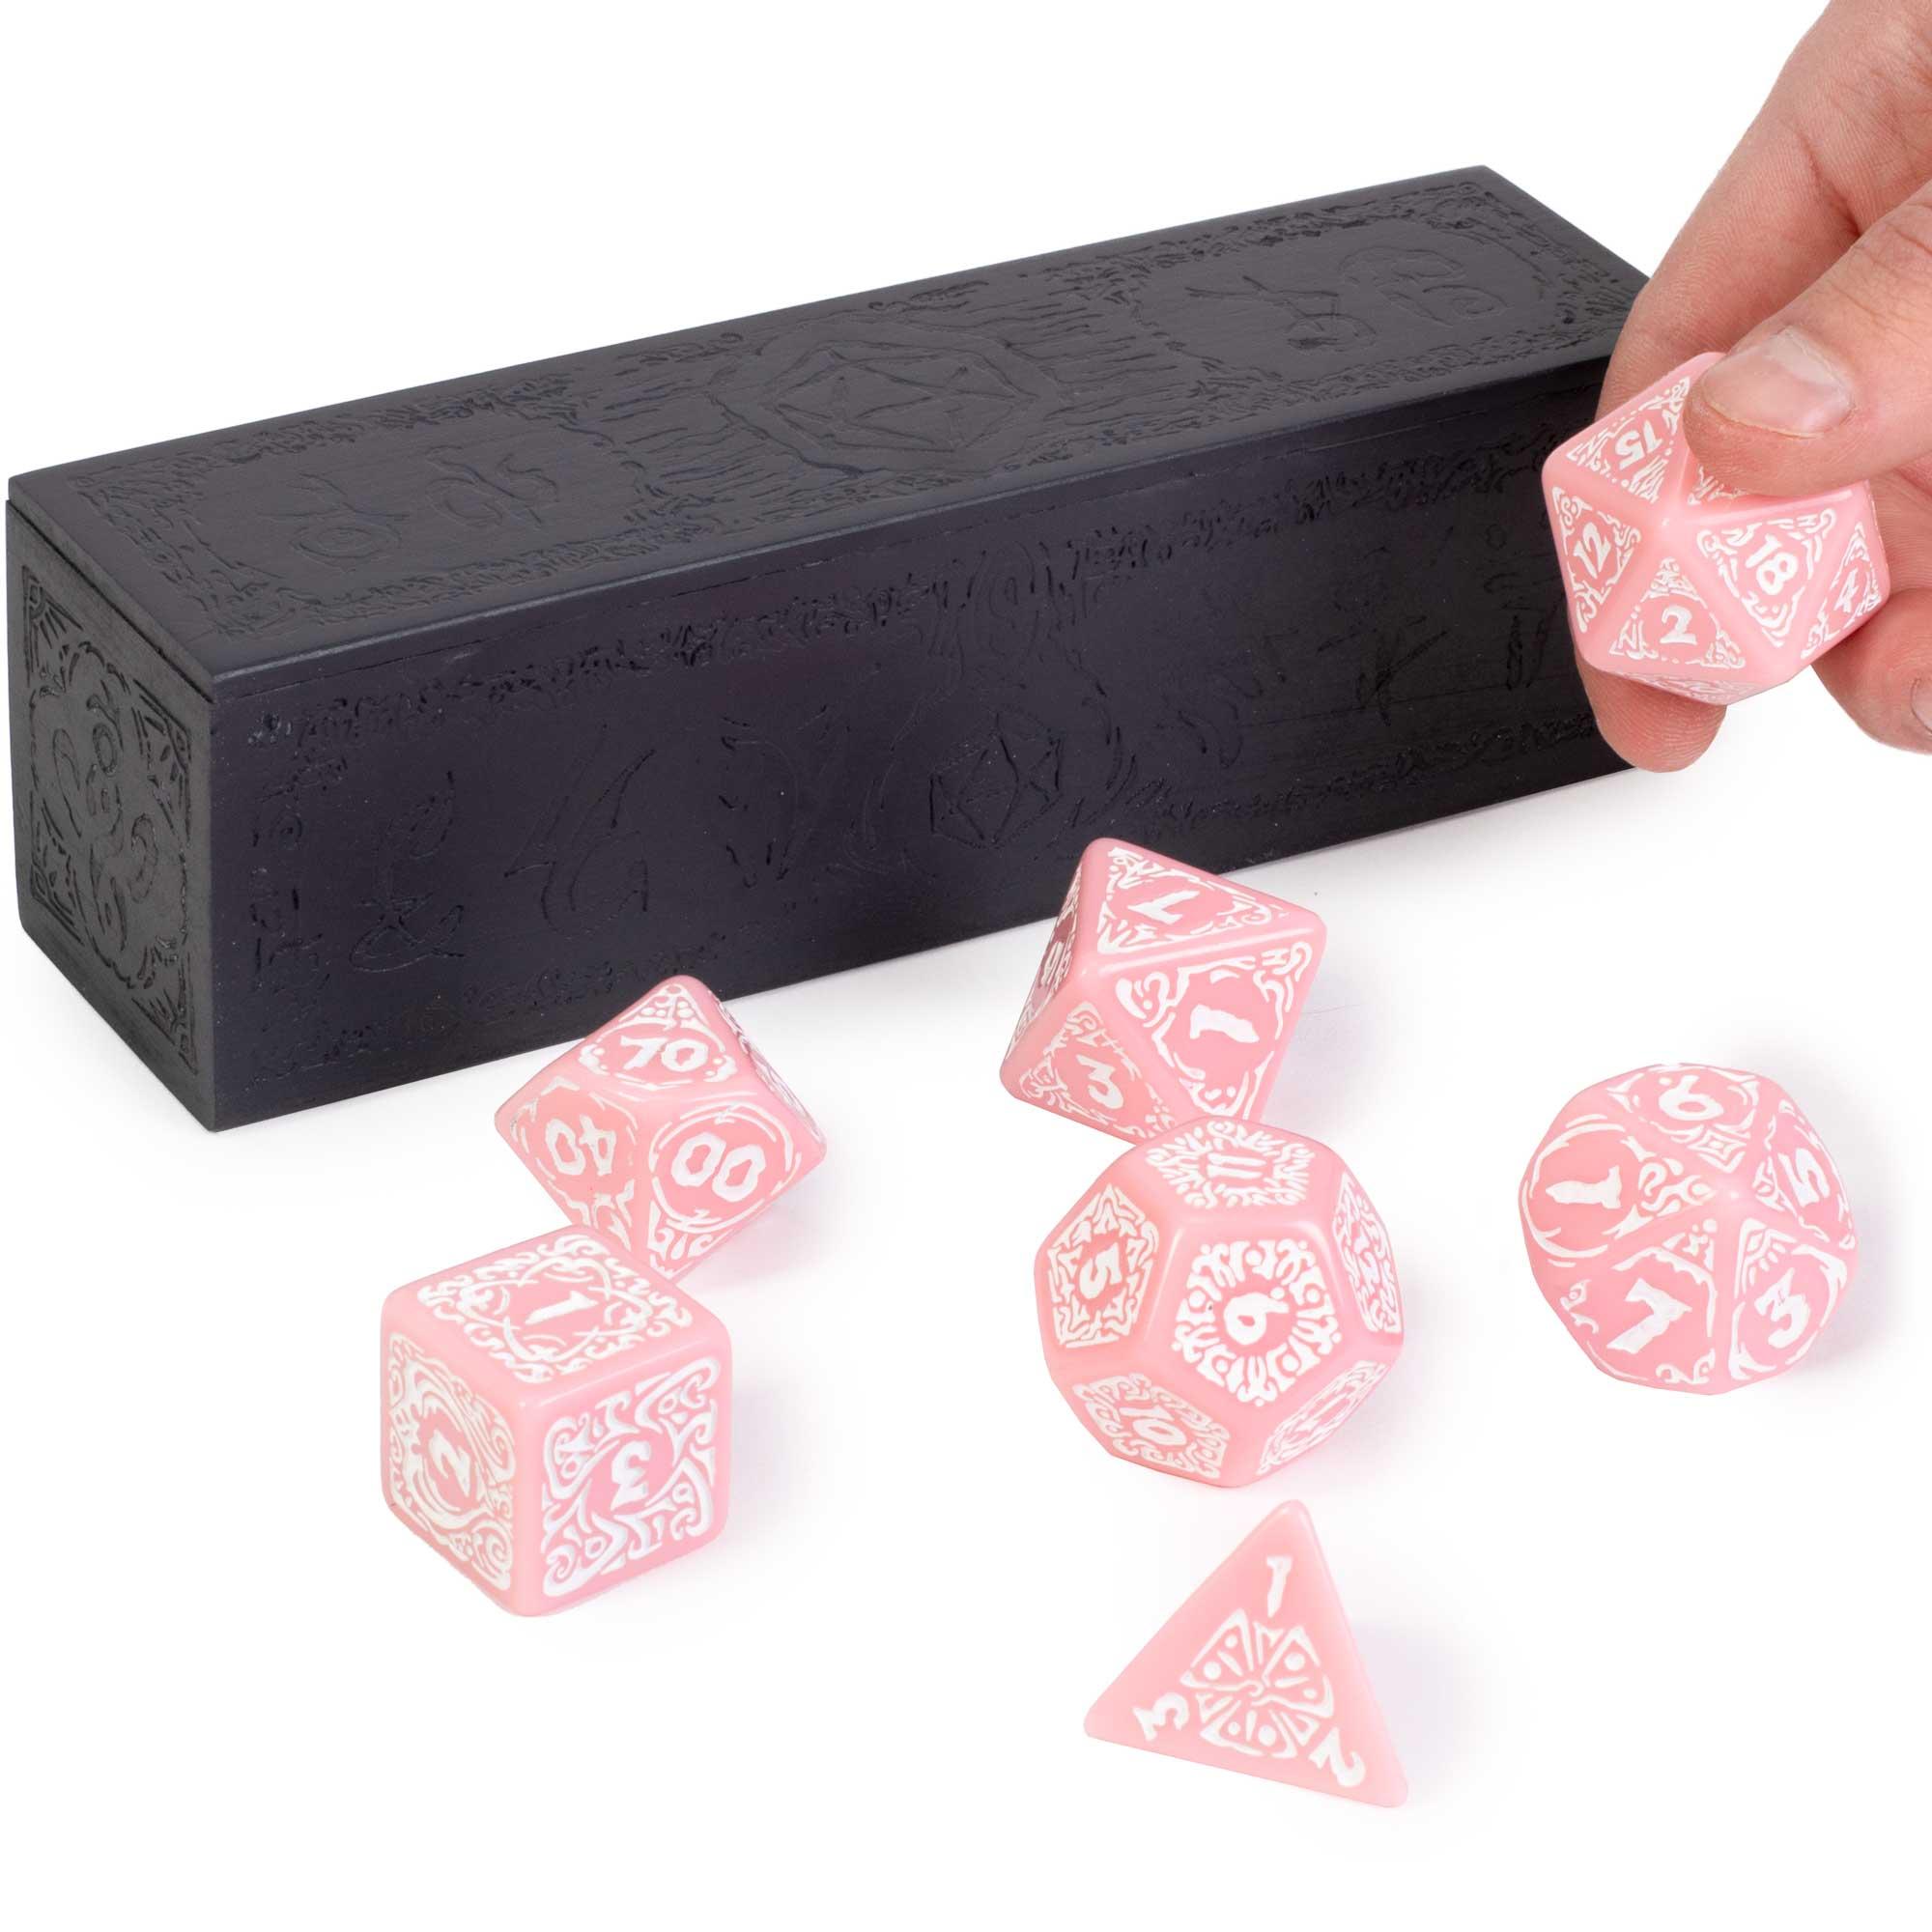 Titan Dice, Calliope - 25mm Giant Polyhedral Dice - Cherry Blossom with White